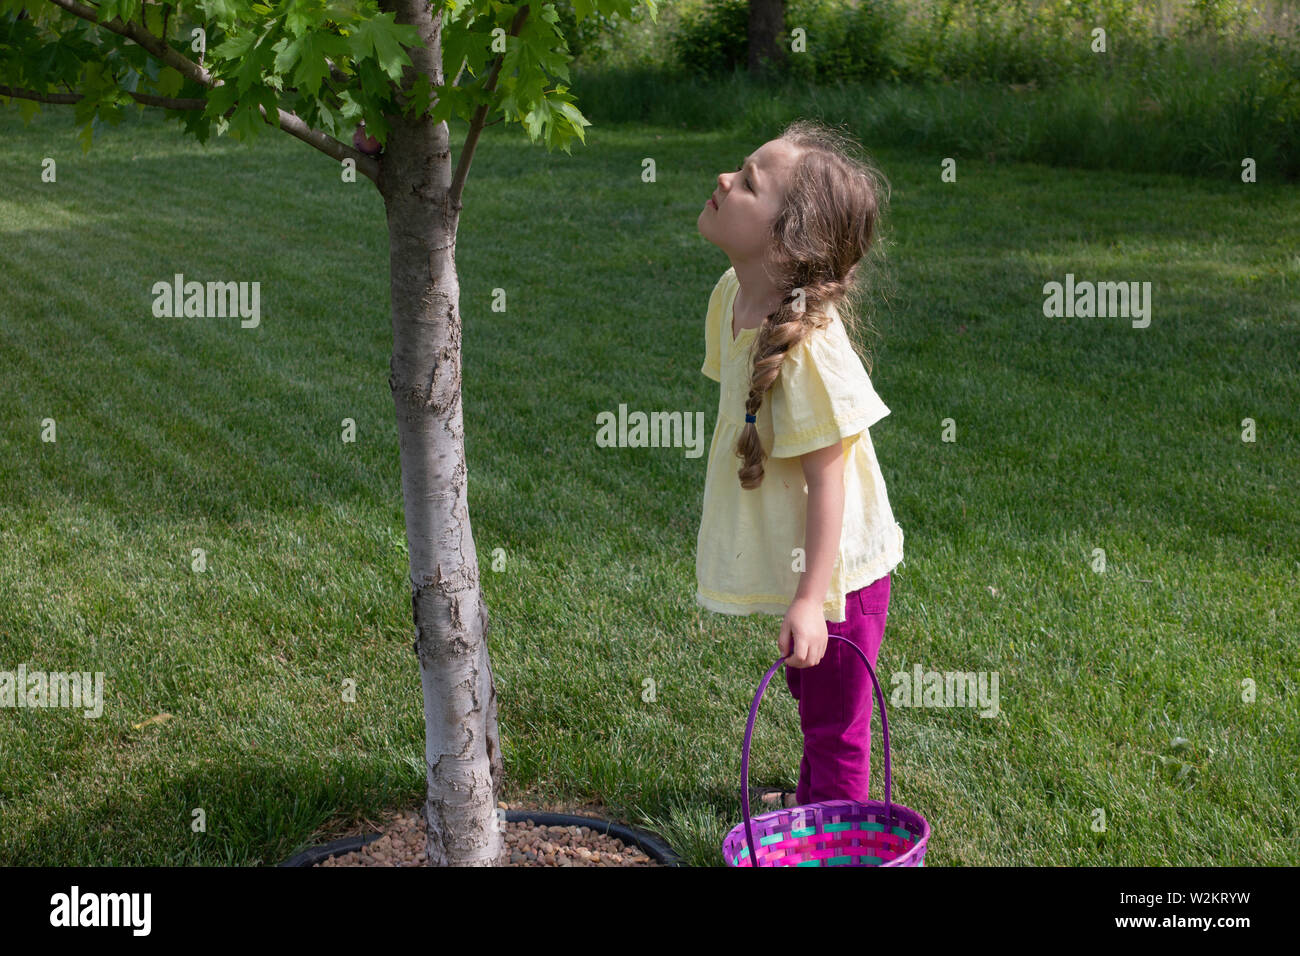 A five-year-old Caucasian girl holding her Easter basket looks up into a small tree looking for Easter eggs. USA. Stock Photo